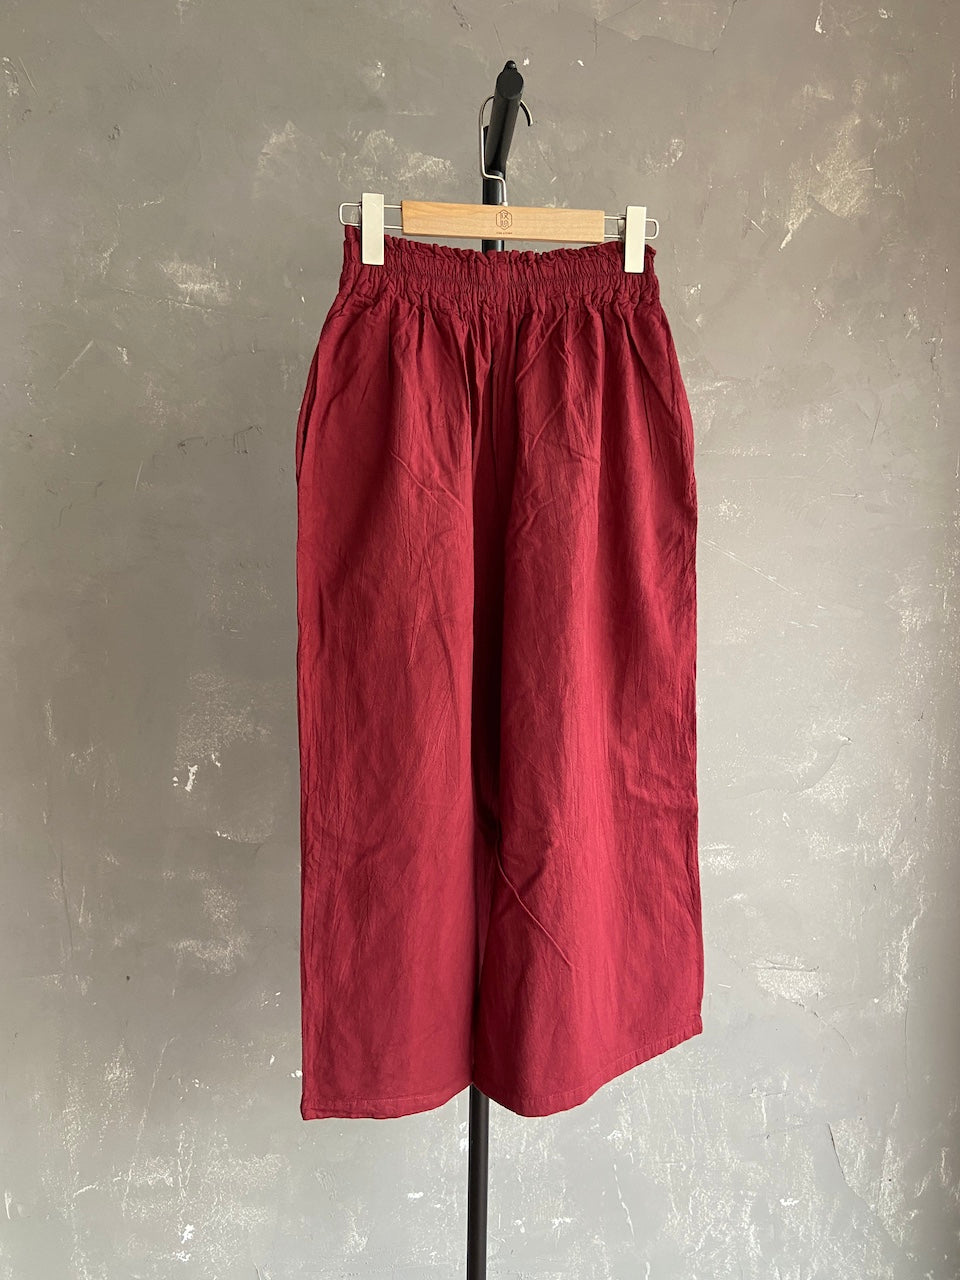 Hand Dyed Farmer's Pants in Maroon